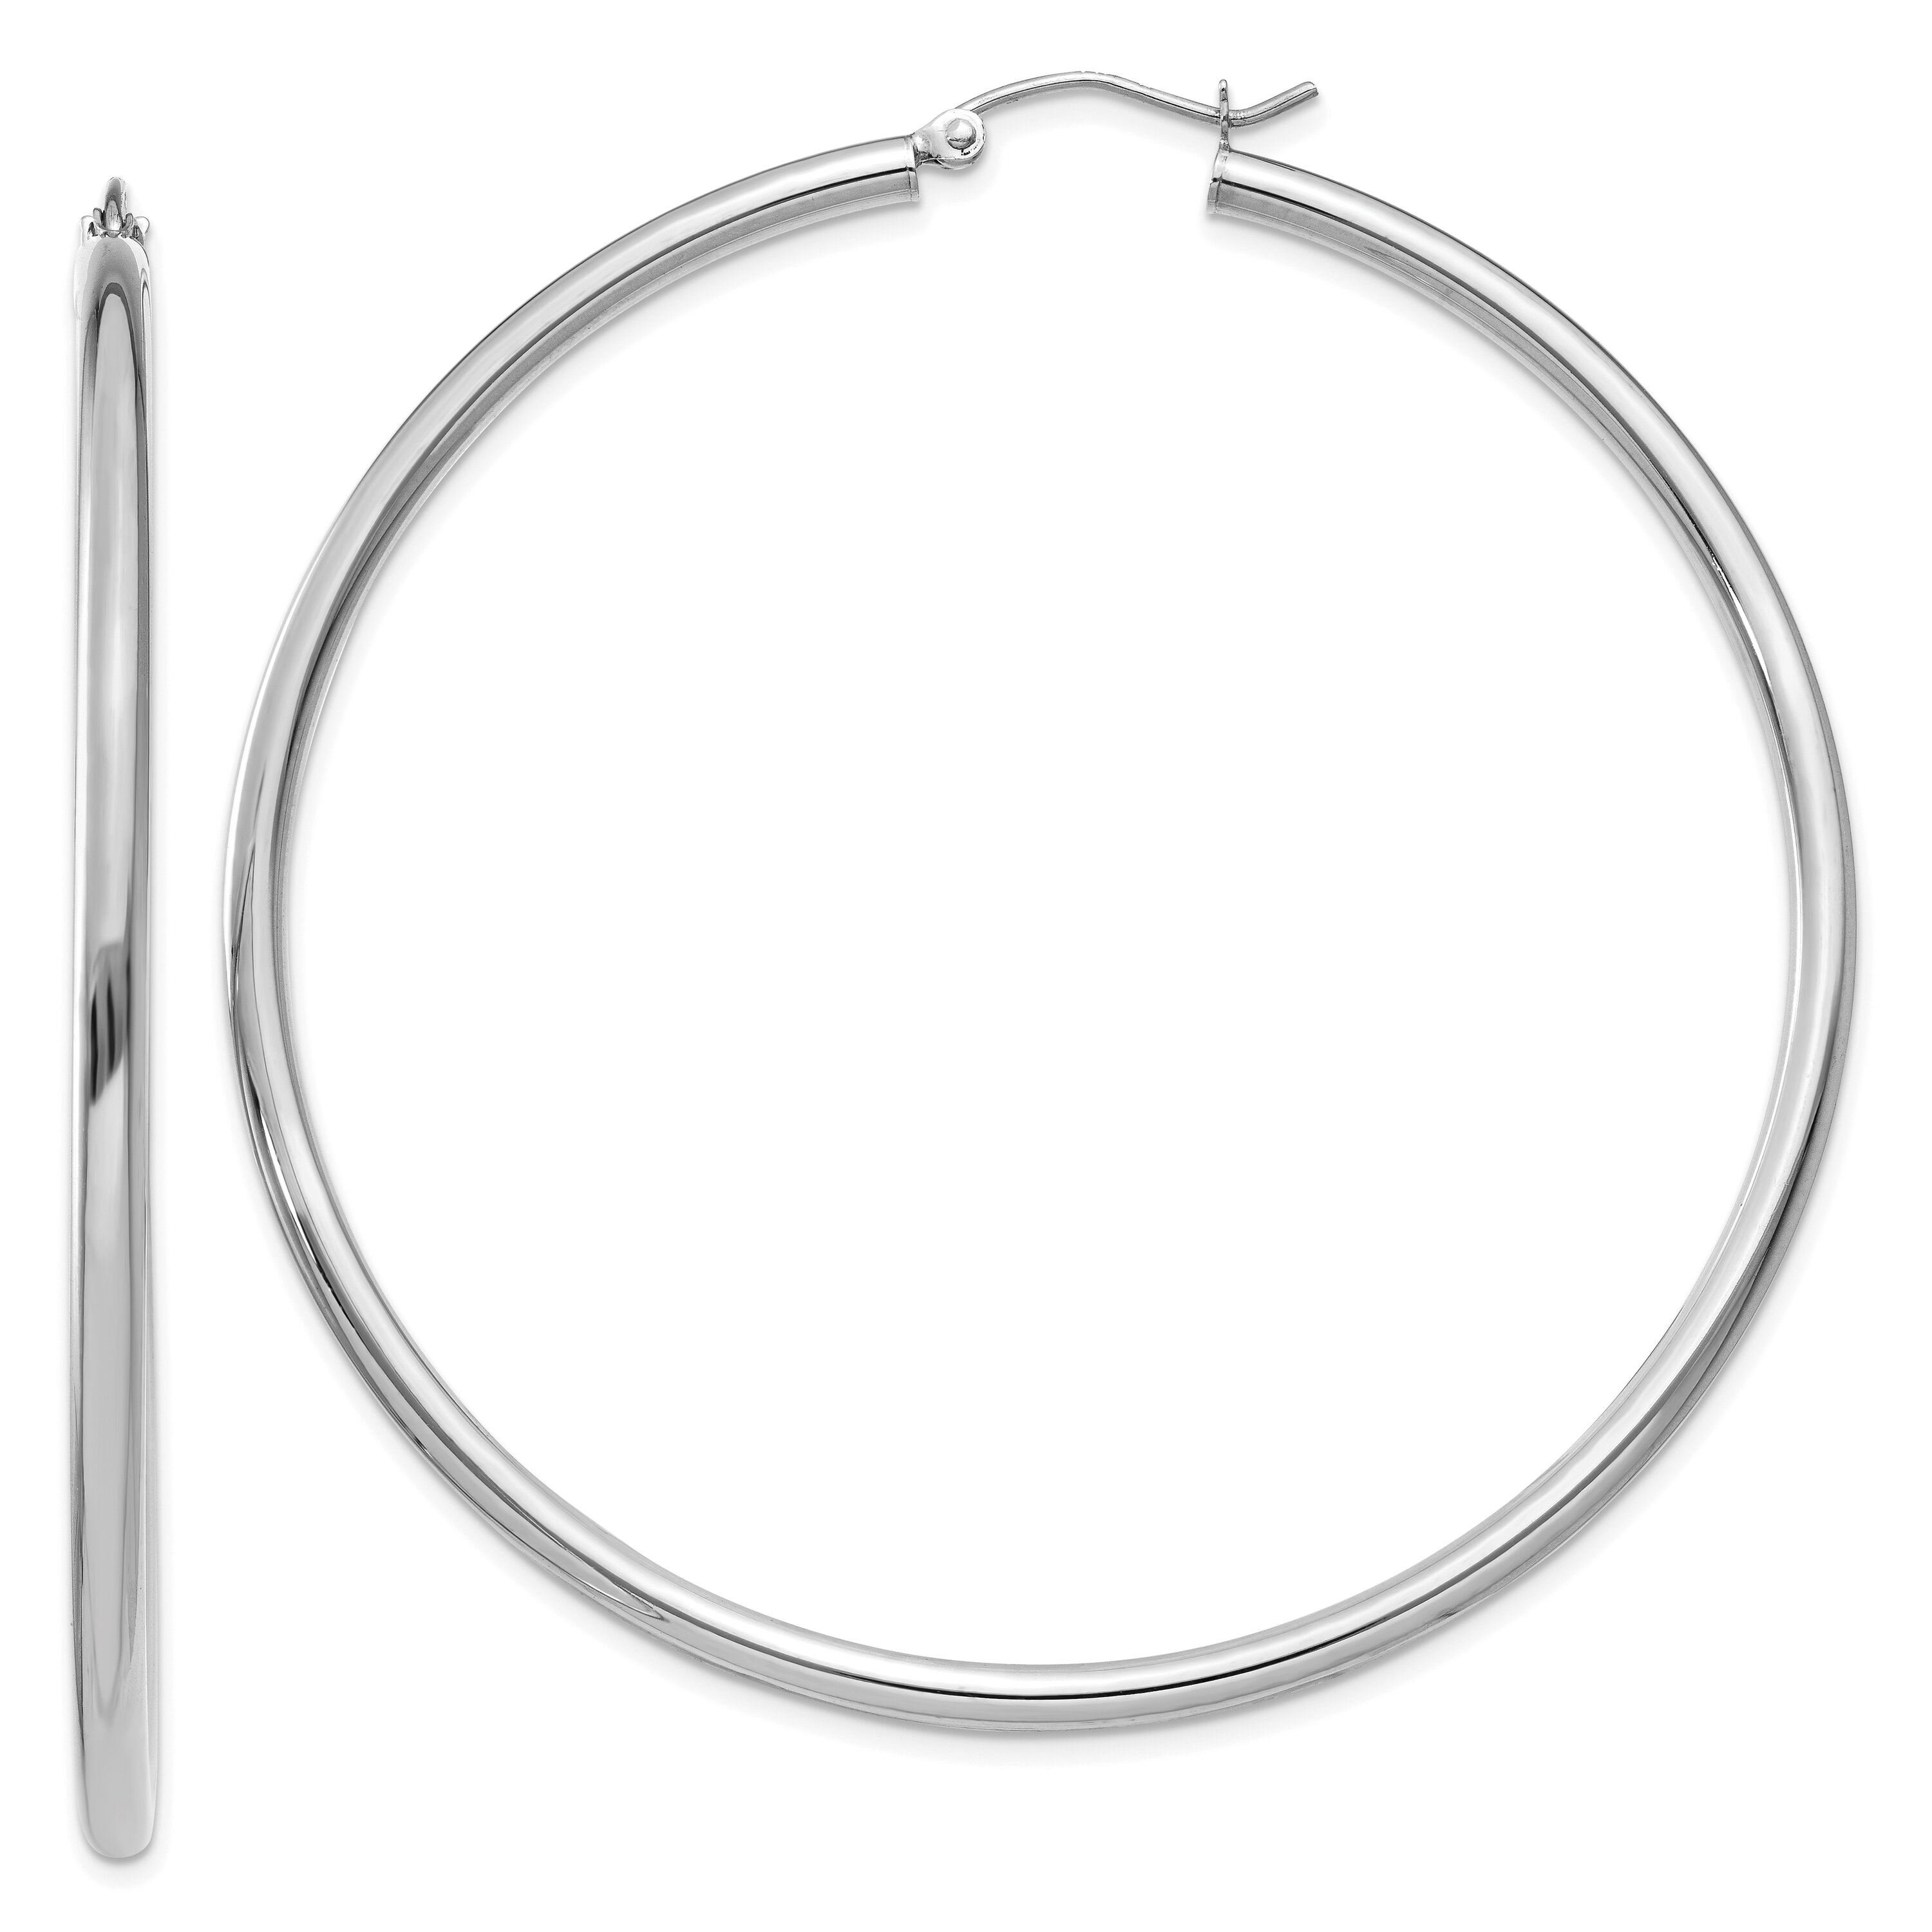 Findingking 14K White Gold Round Hoop Earrings Polished Jewelry